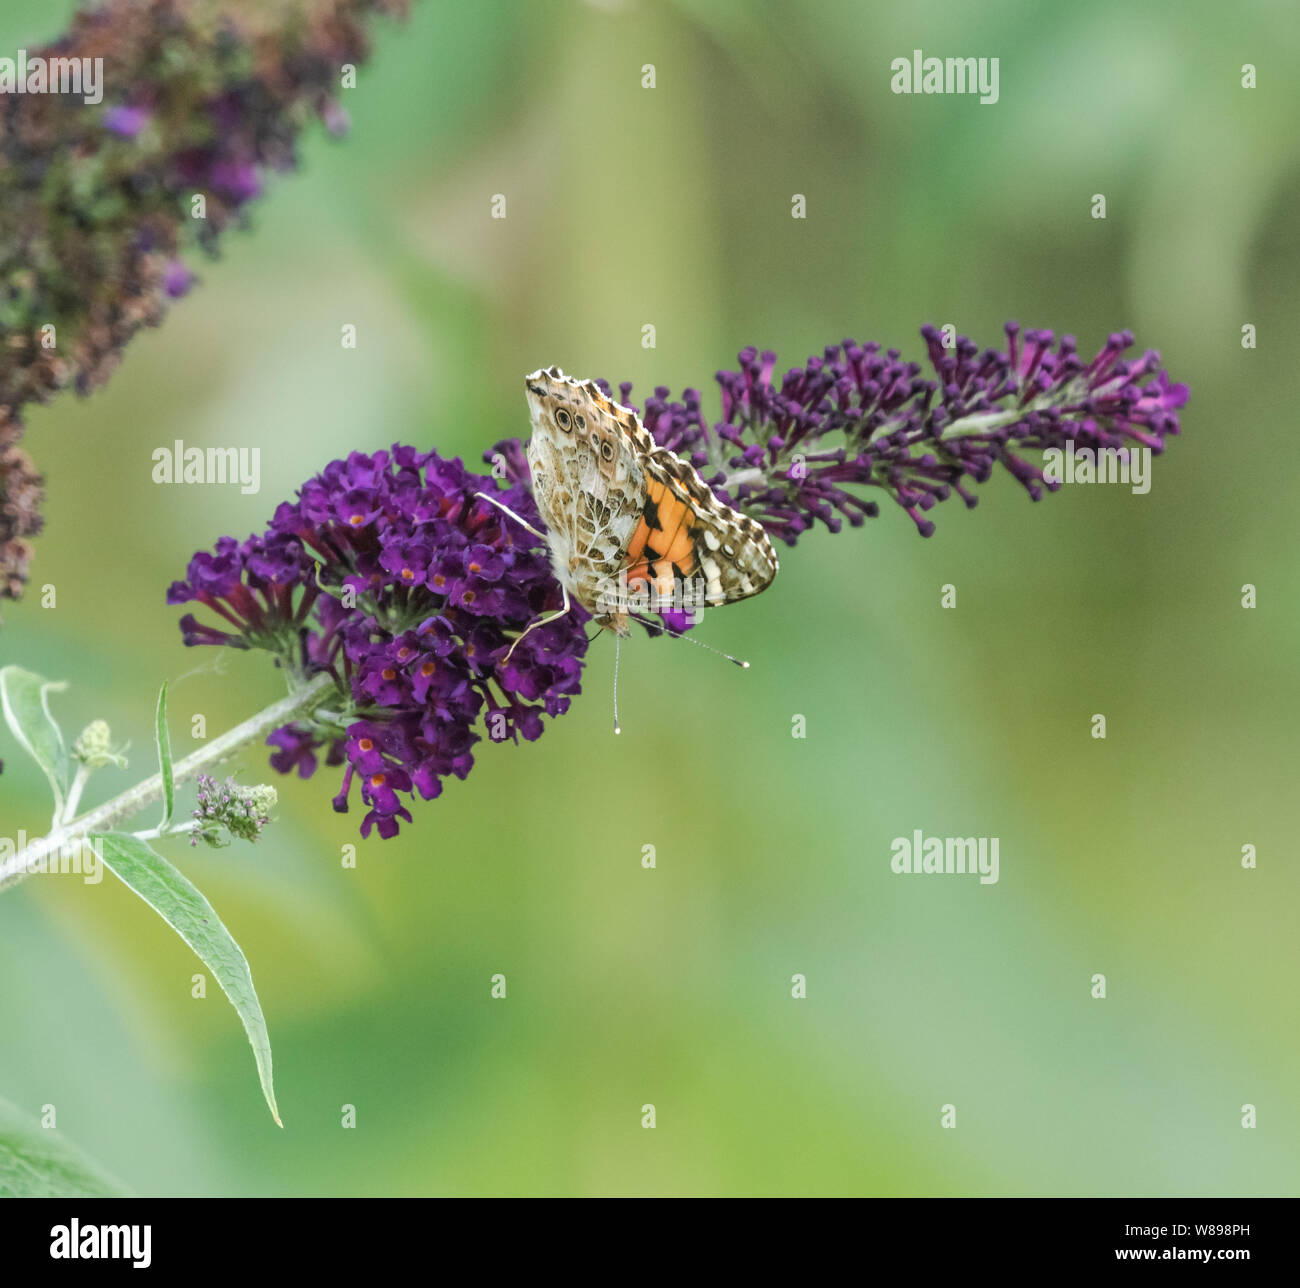 A painted lady butterfly on a buddleia flower, The wings are closed so you can see the patterns on the underwings. Stock Photo